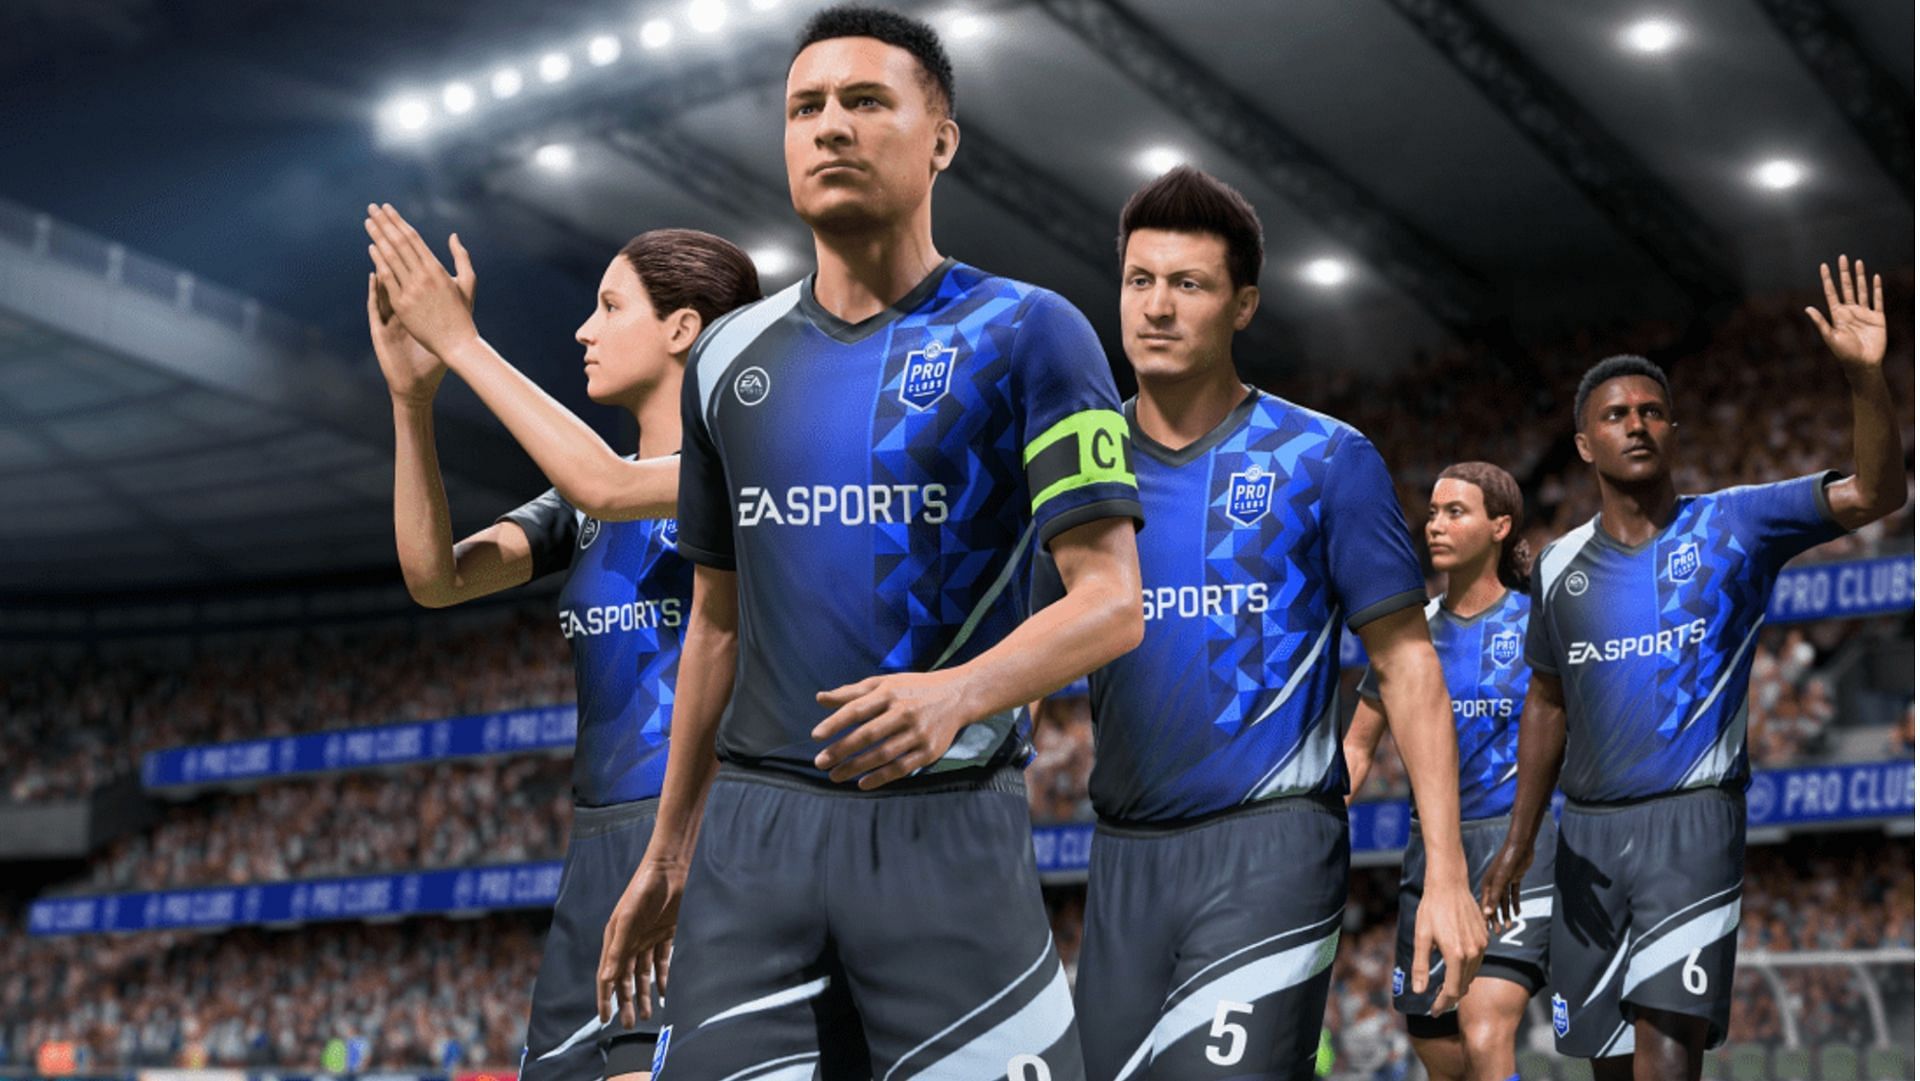 Epic Games Store Confirms That it Will Honour All Rs 5 FIFA 23 Purchases -  MySmartPrice